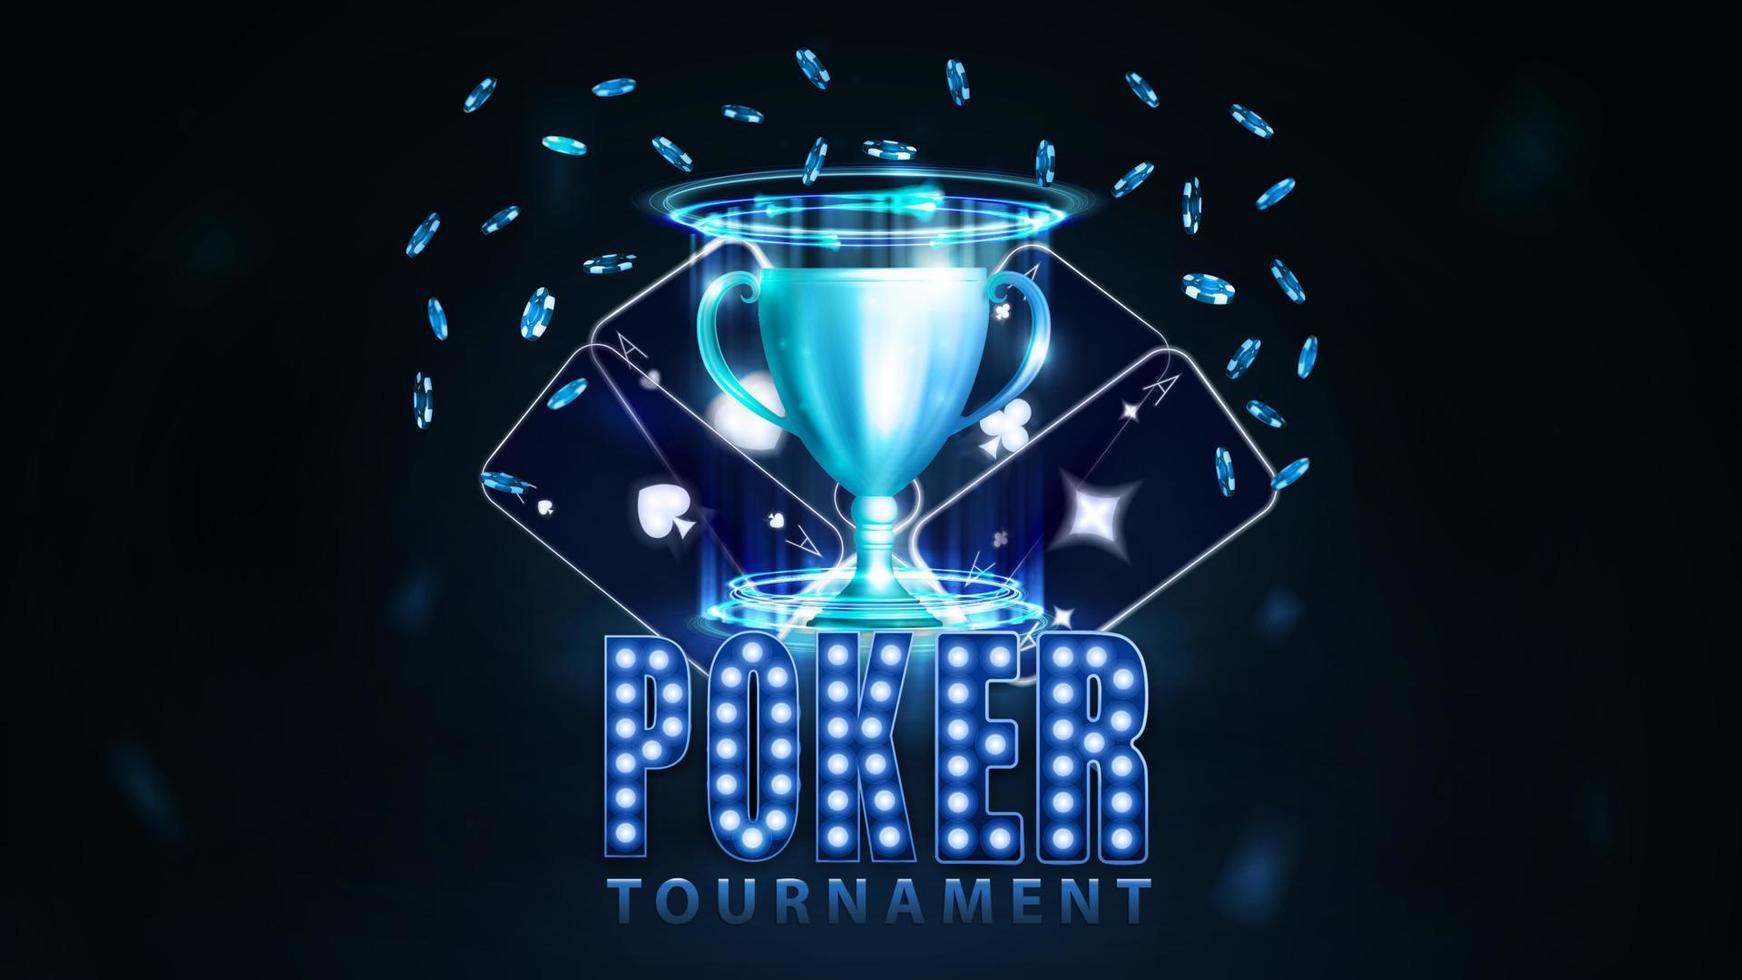 Poker tournament, banner with neon casino playing cards, poker chips, cup of winner and symbol with lamp bulbs vector